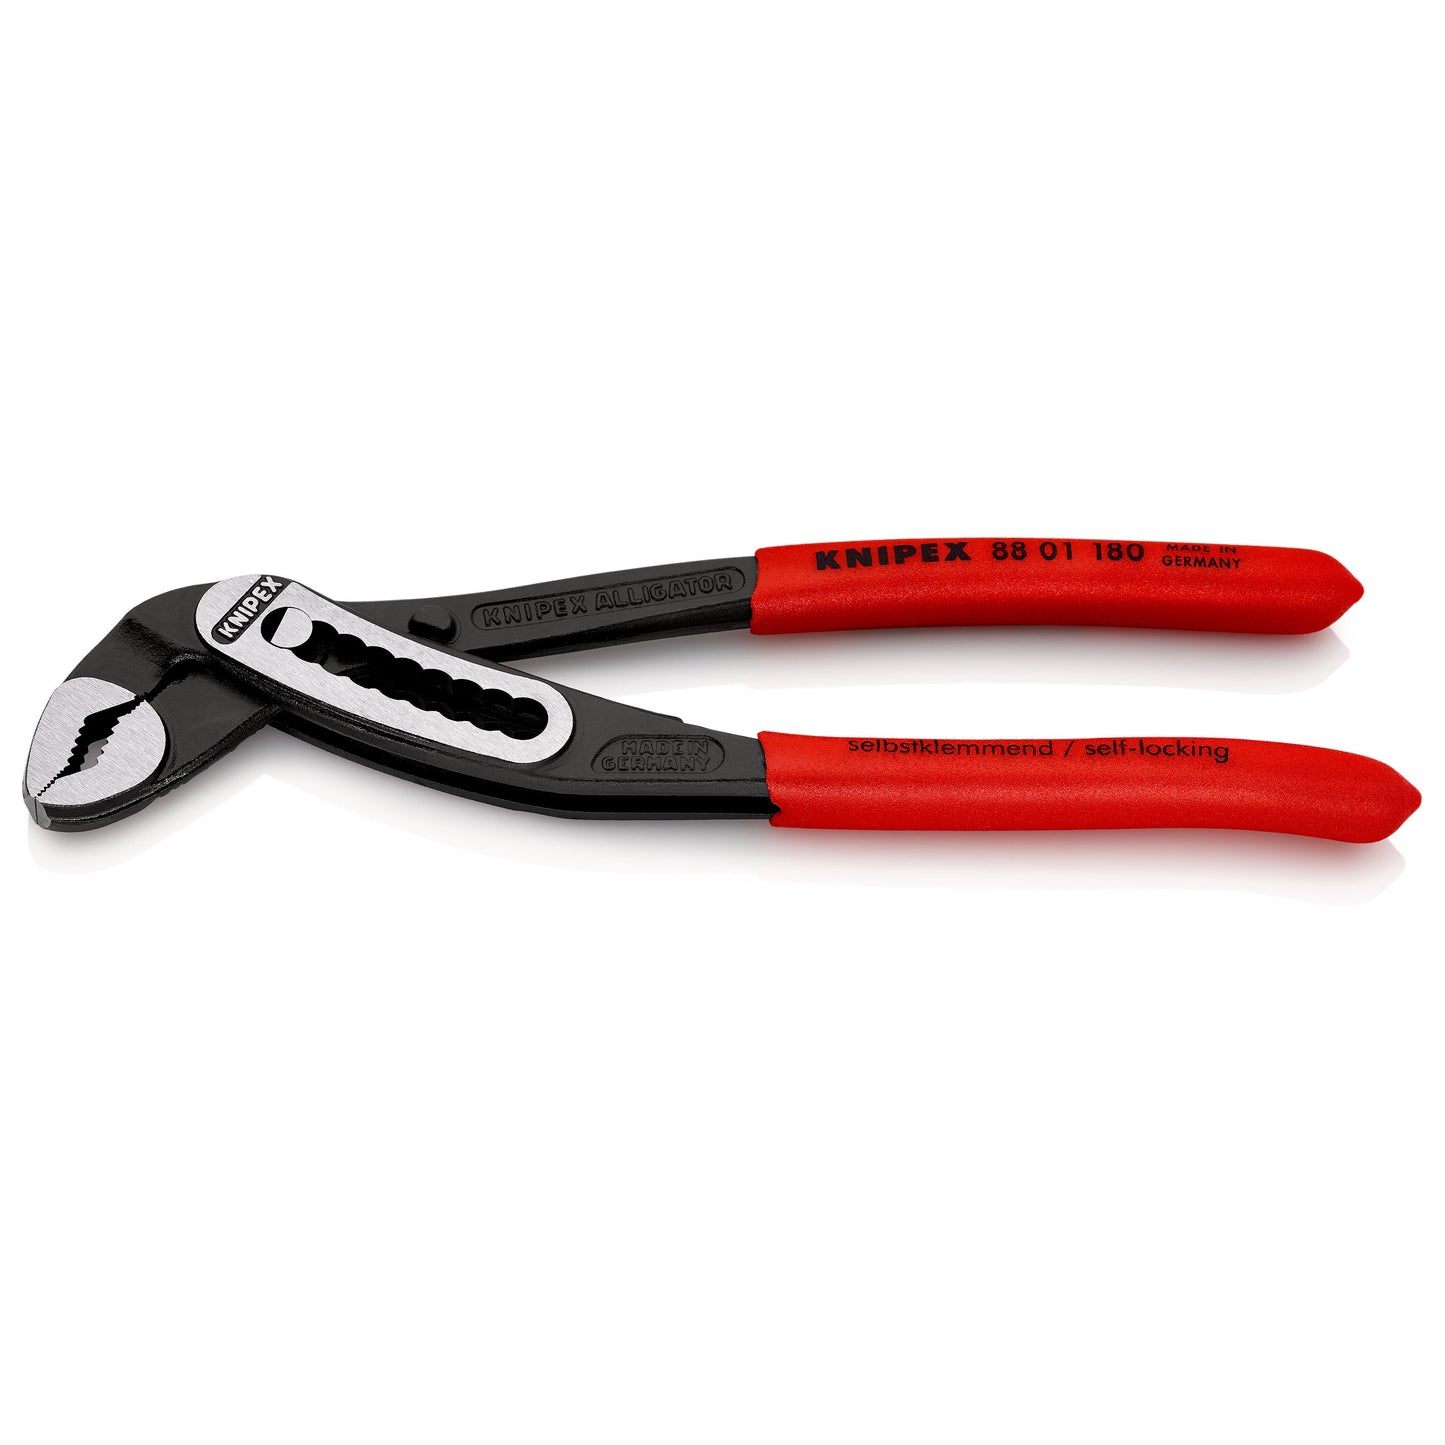 Knipex 88 01 180 - Alligator® pliers 180 mm with PVC handles